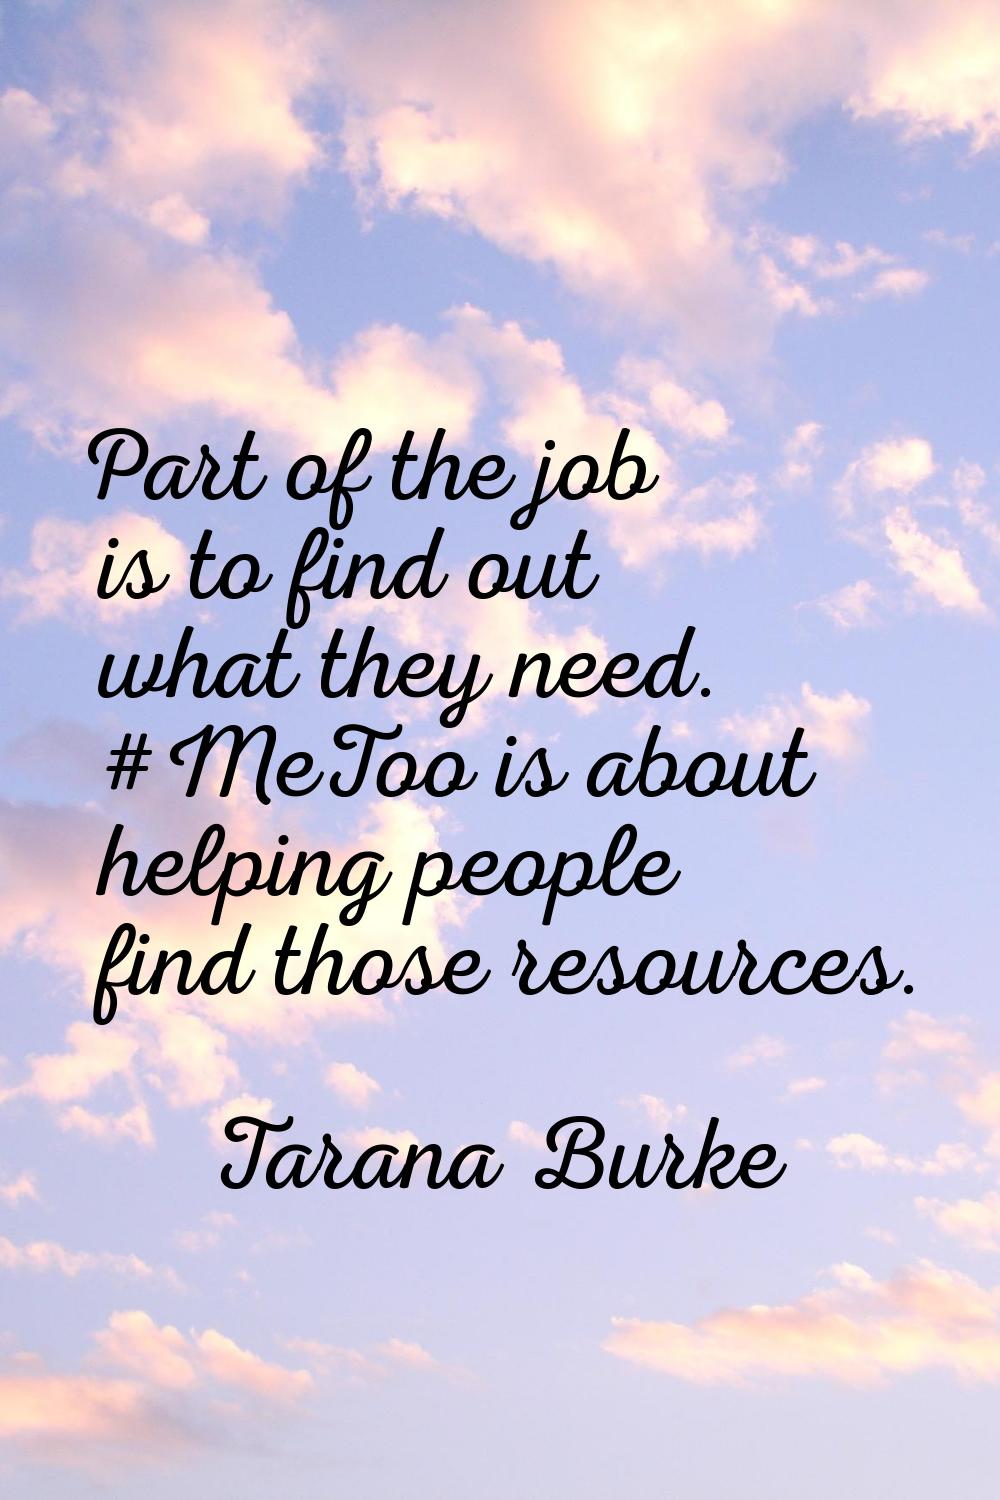 Part of the job is to find out what they need. #MeToo is about helping people find those resources.